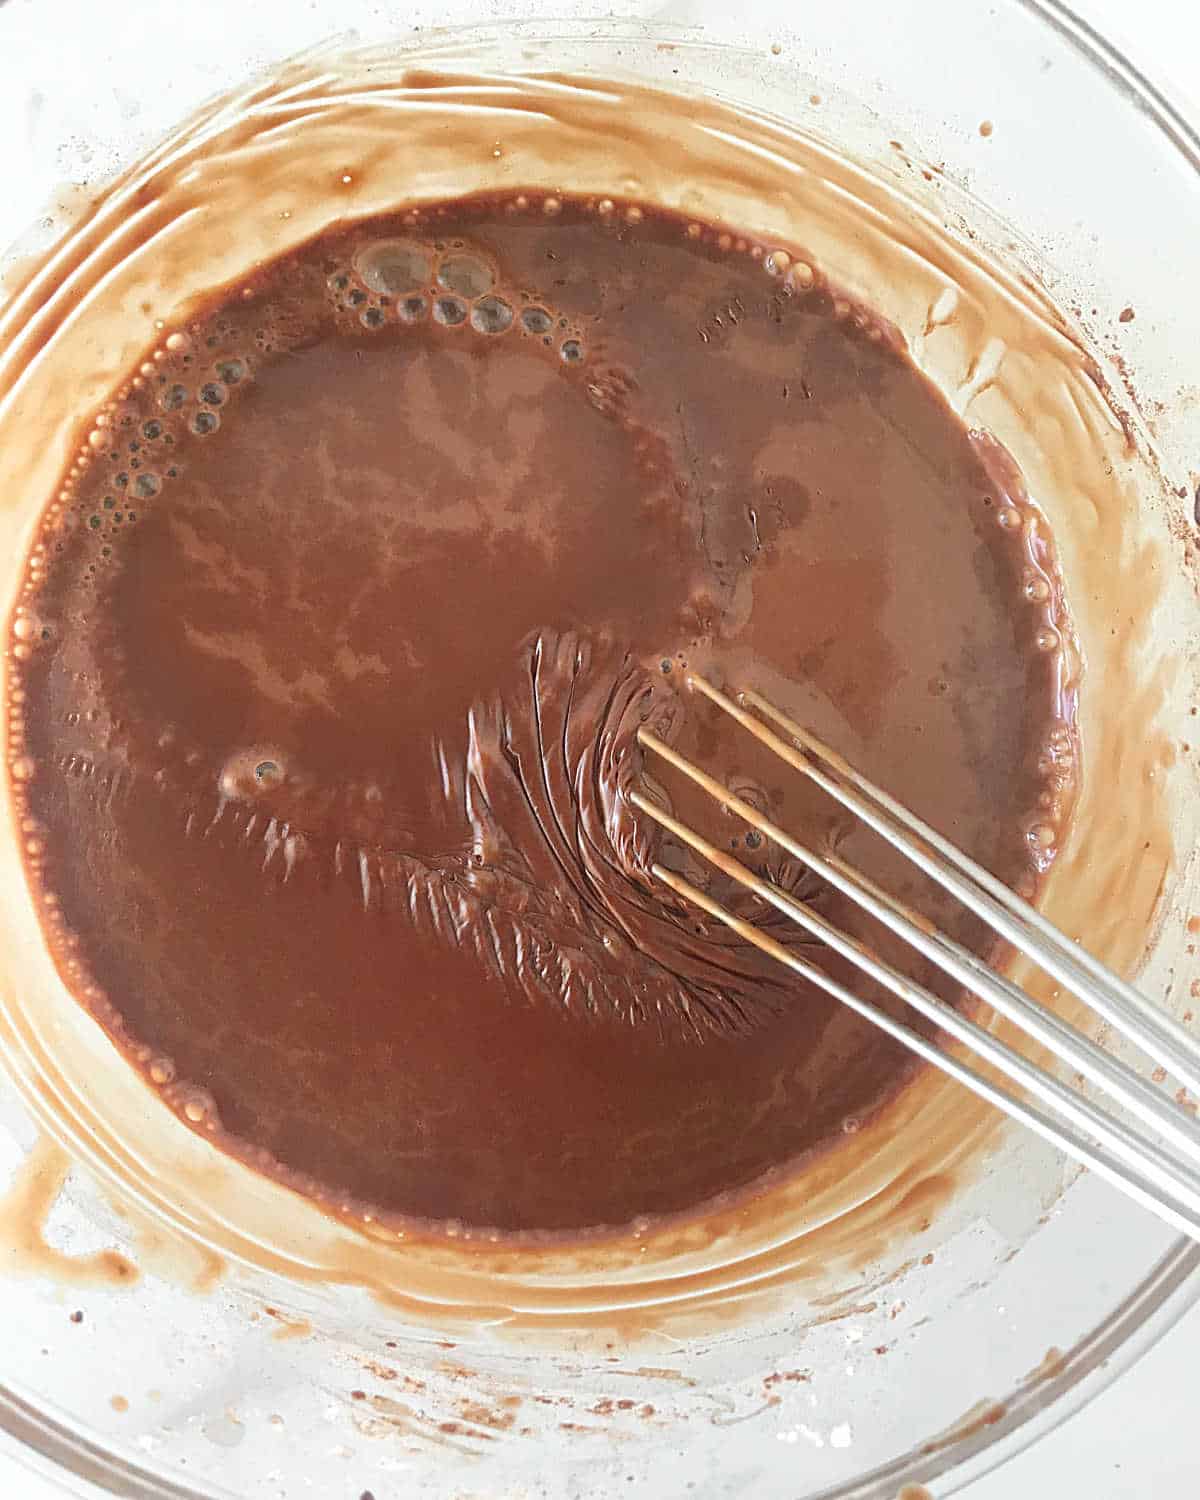 Metal whisk stirring chocolate pudding in a glass bowl.